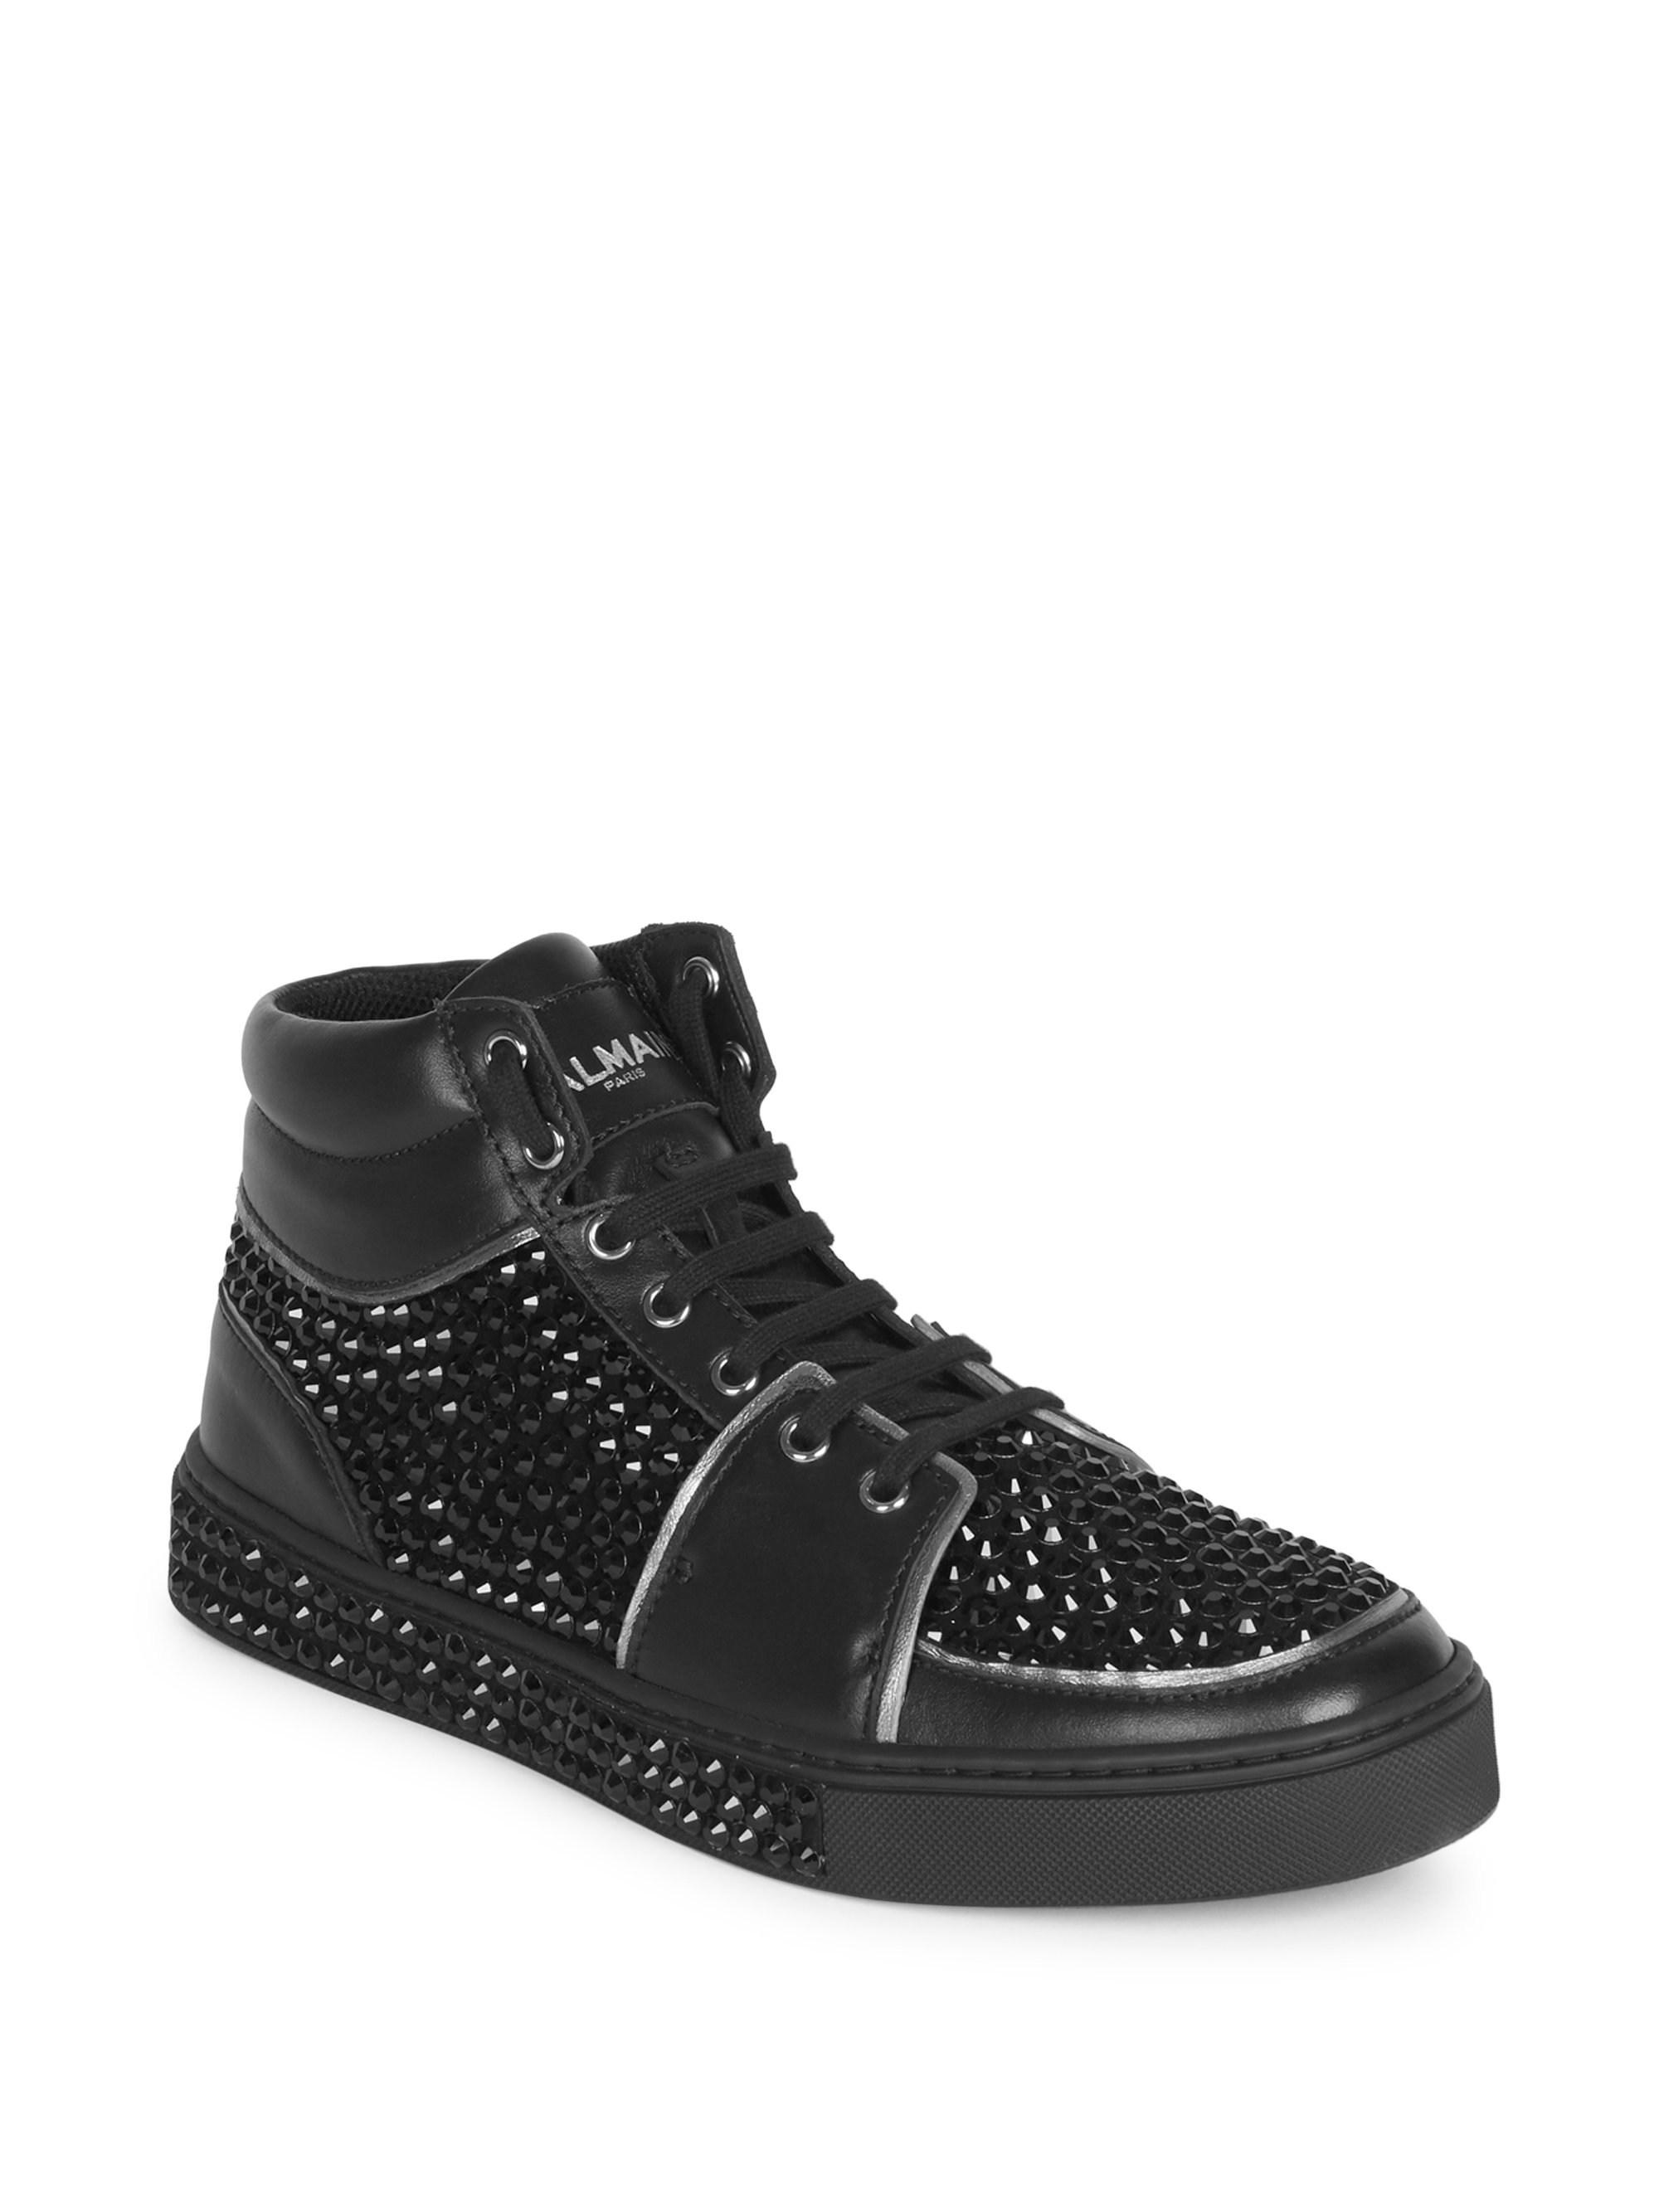 Elevated Edge: Balmain High Top Sneakers Adorned with Studs